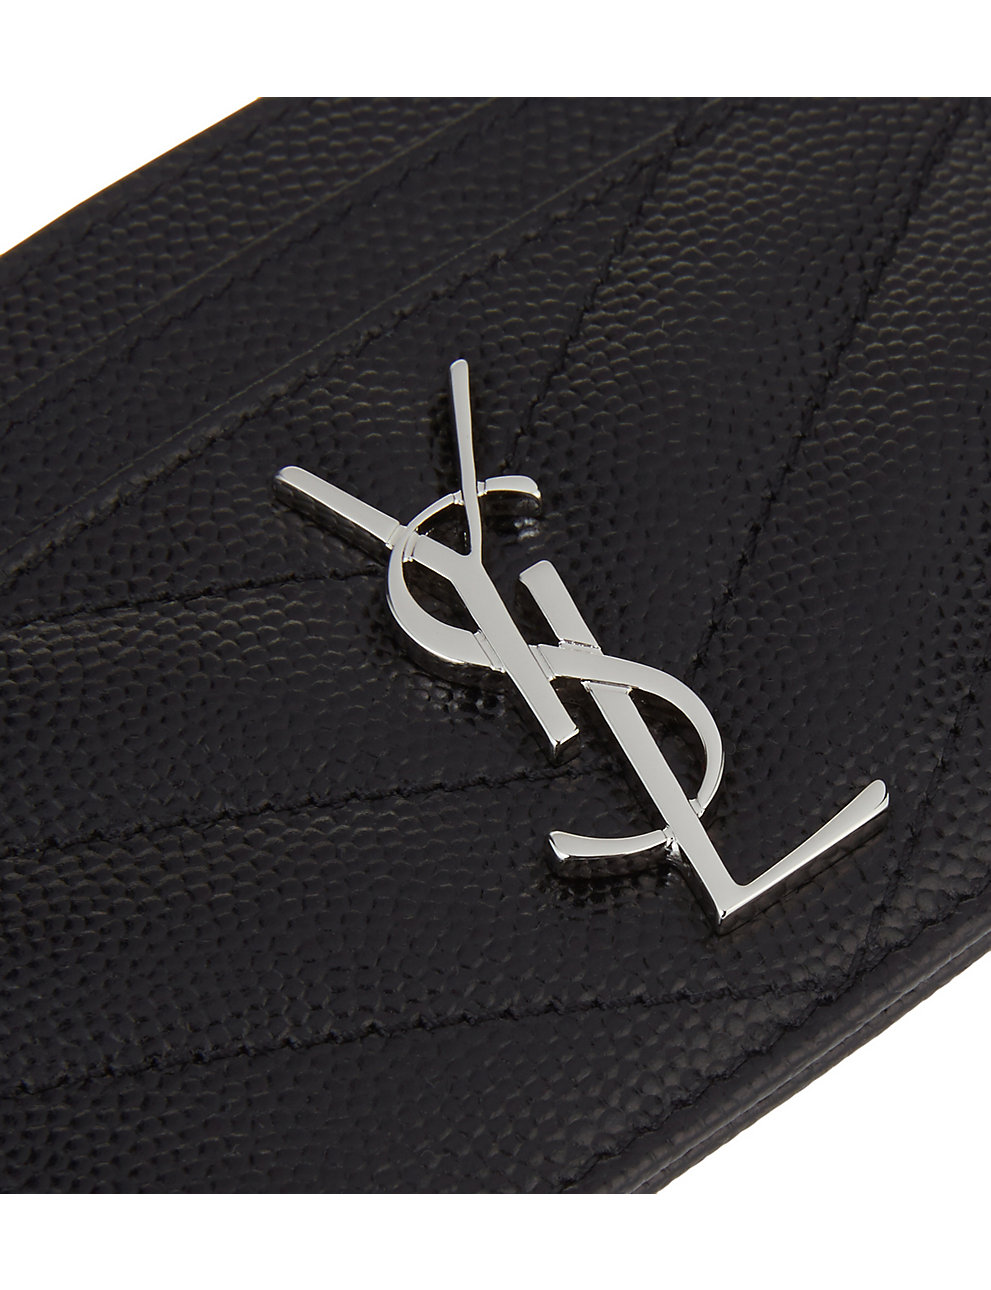 Saint Laurent Card Holders − Sale: up to −31%